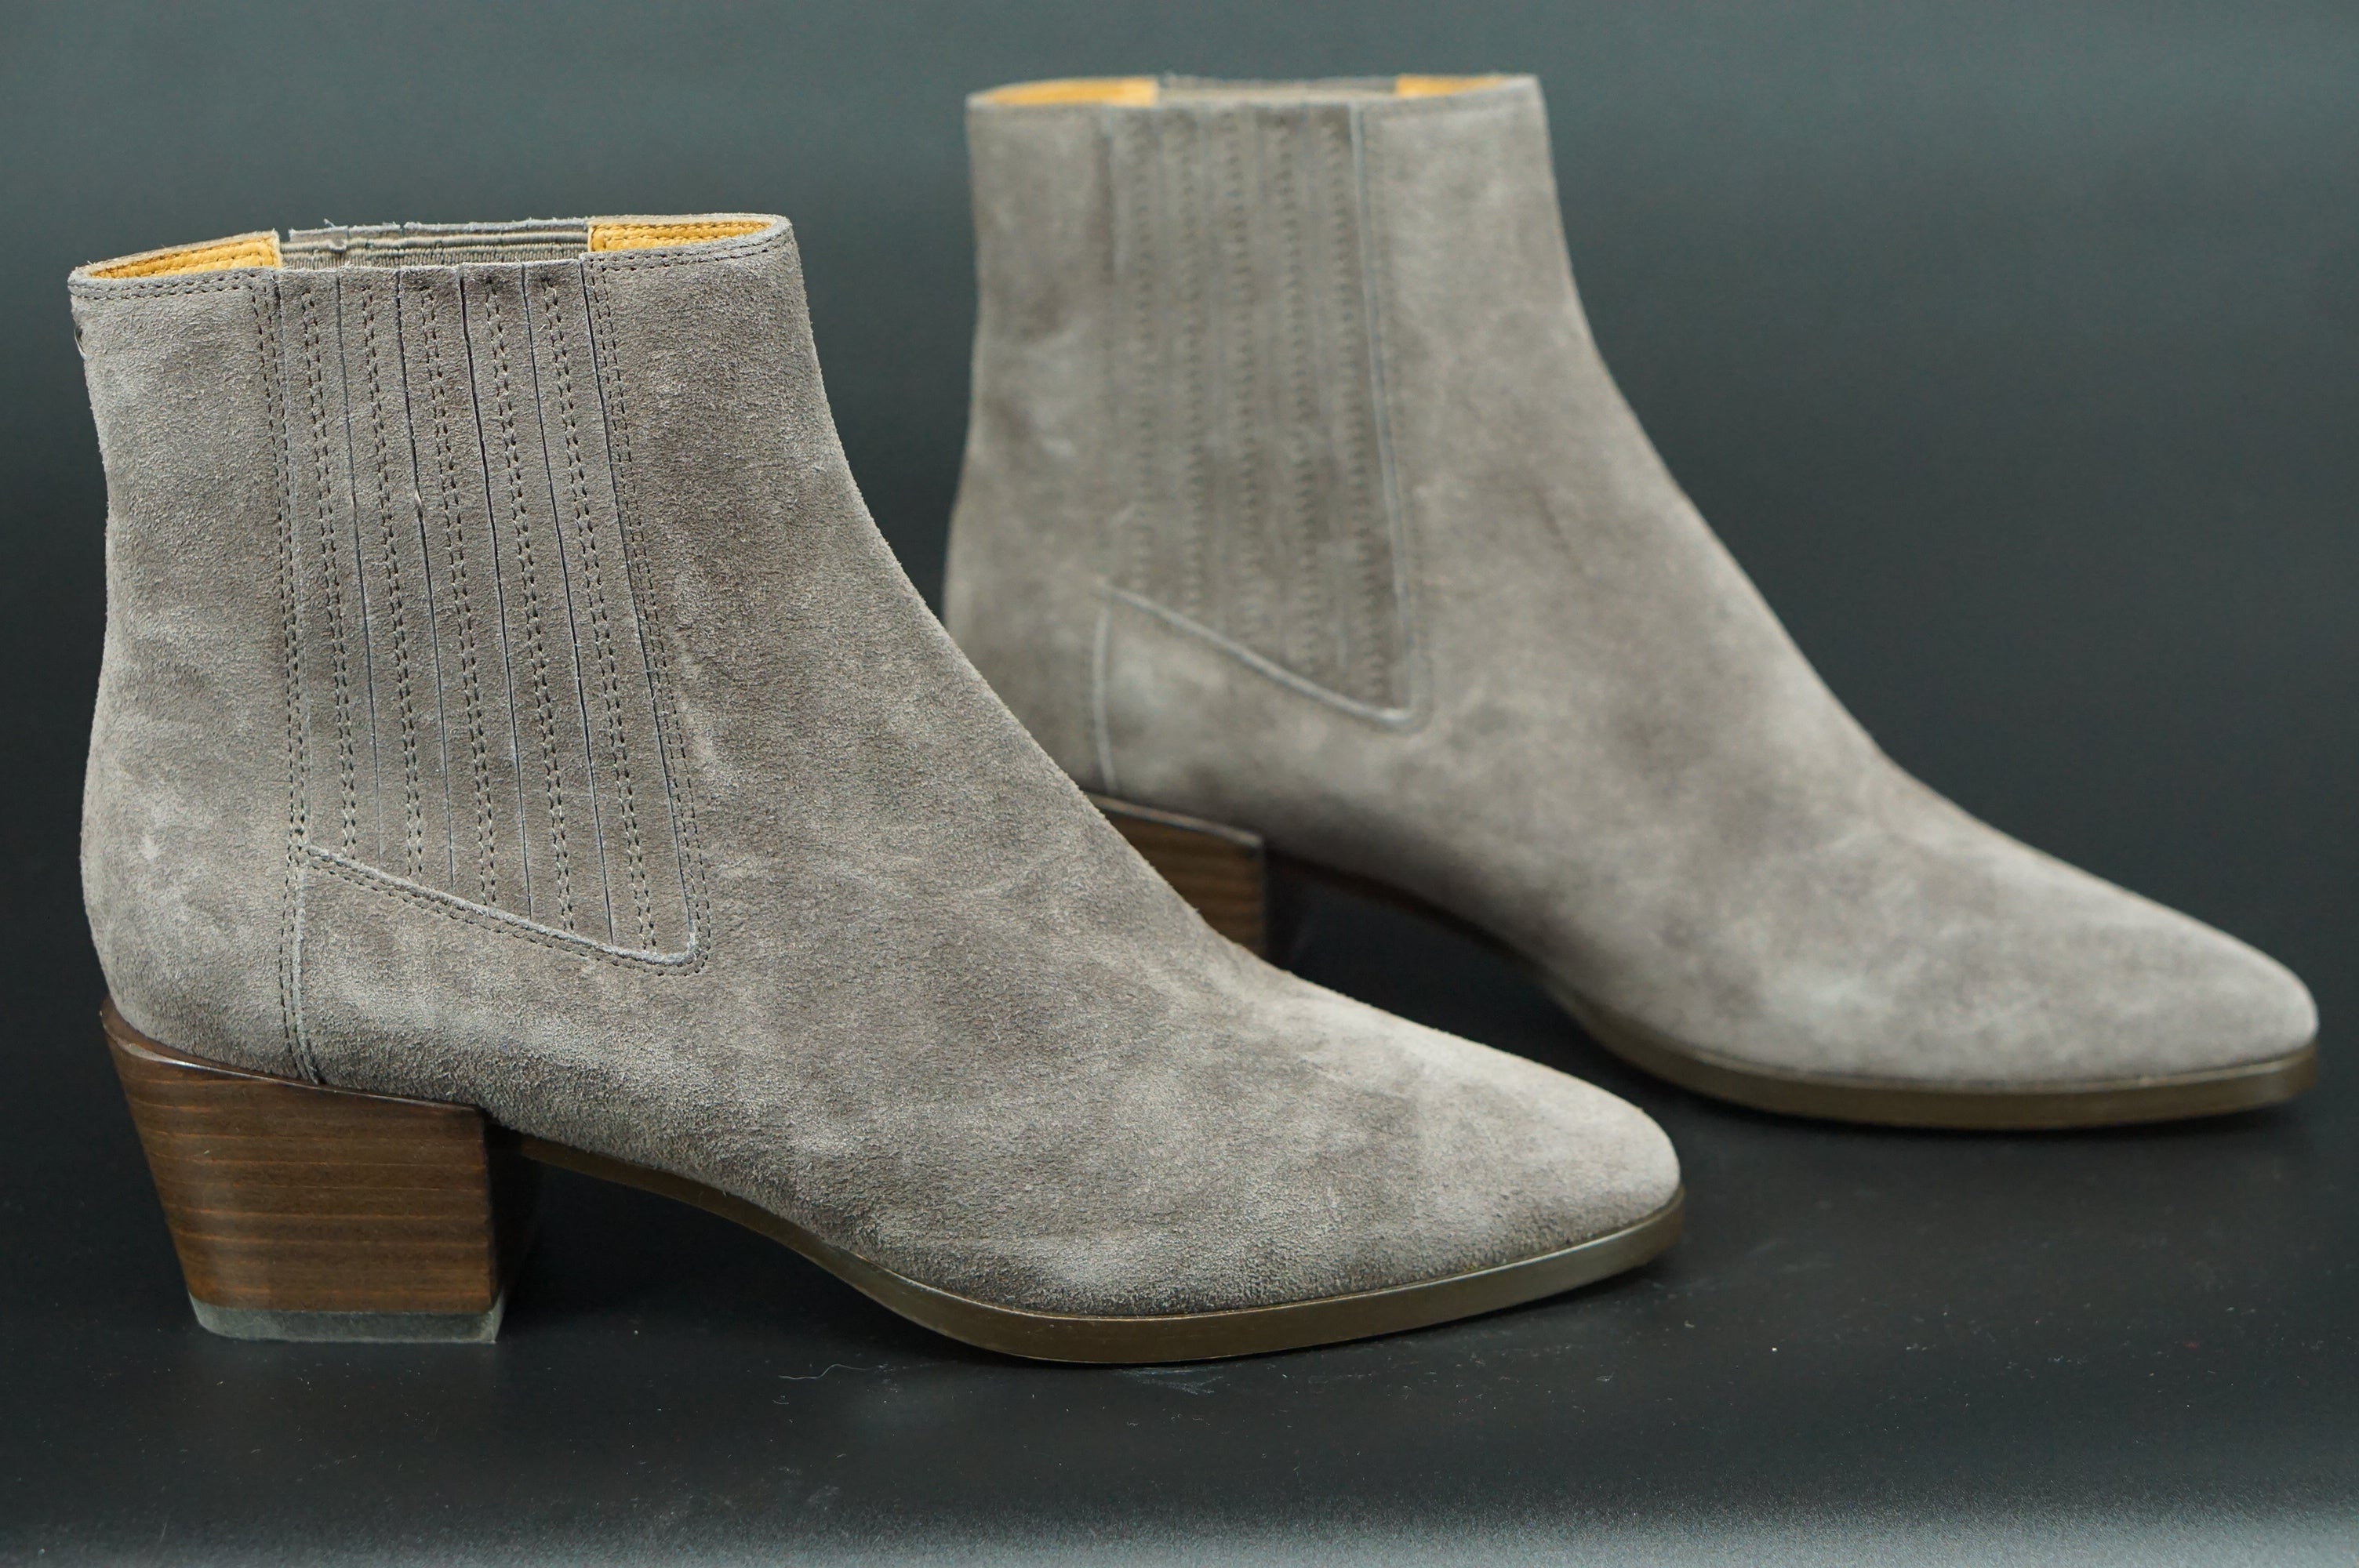 Rag & Bone Rover Almond Toe suede High Heel Ankle Boots SZ 37 New $395